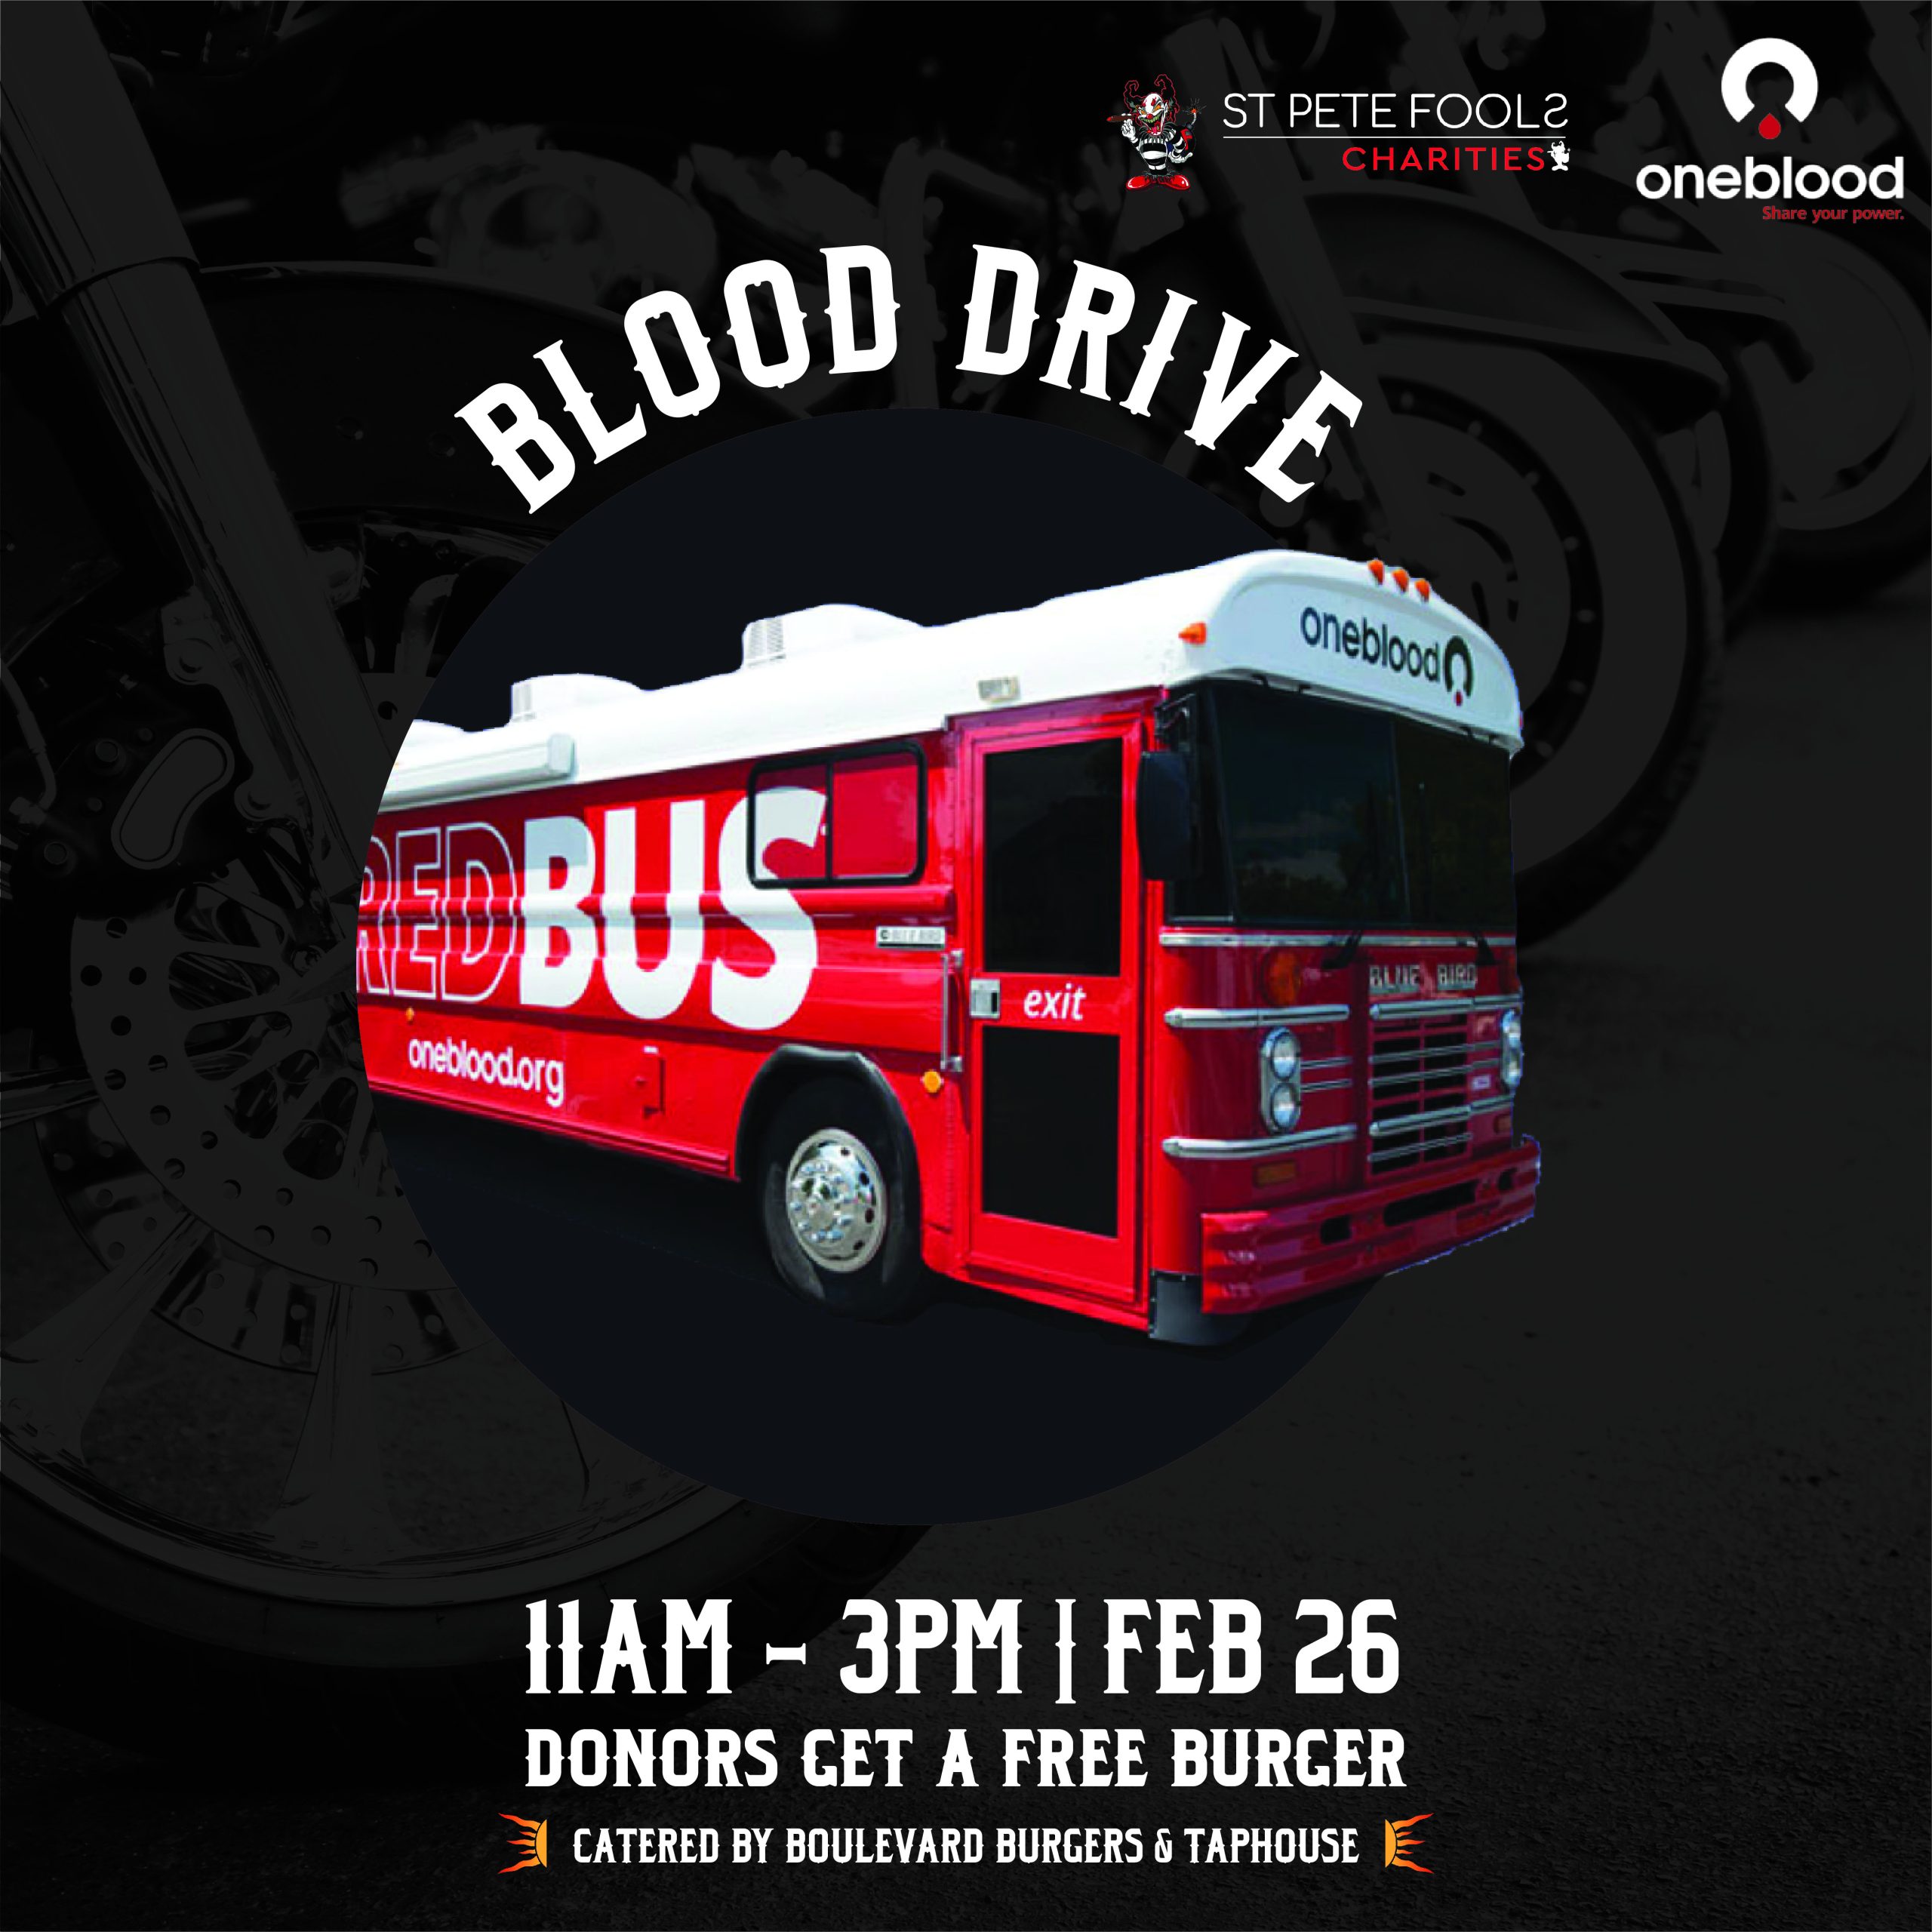 St. Pete Fools Charities Give the Gift of Life with Blood Drive